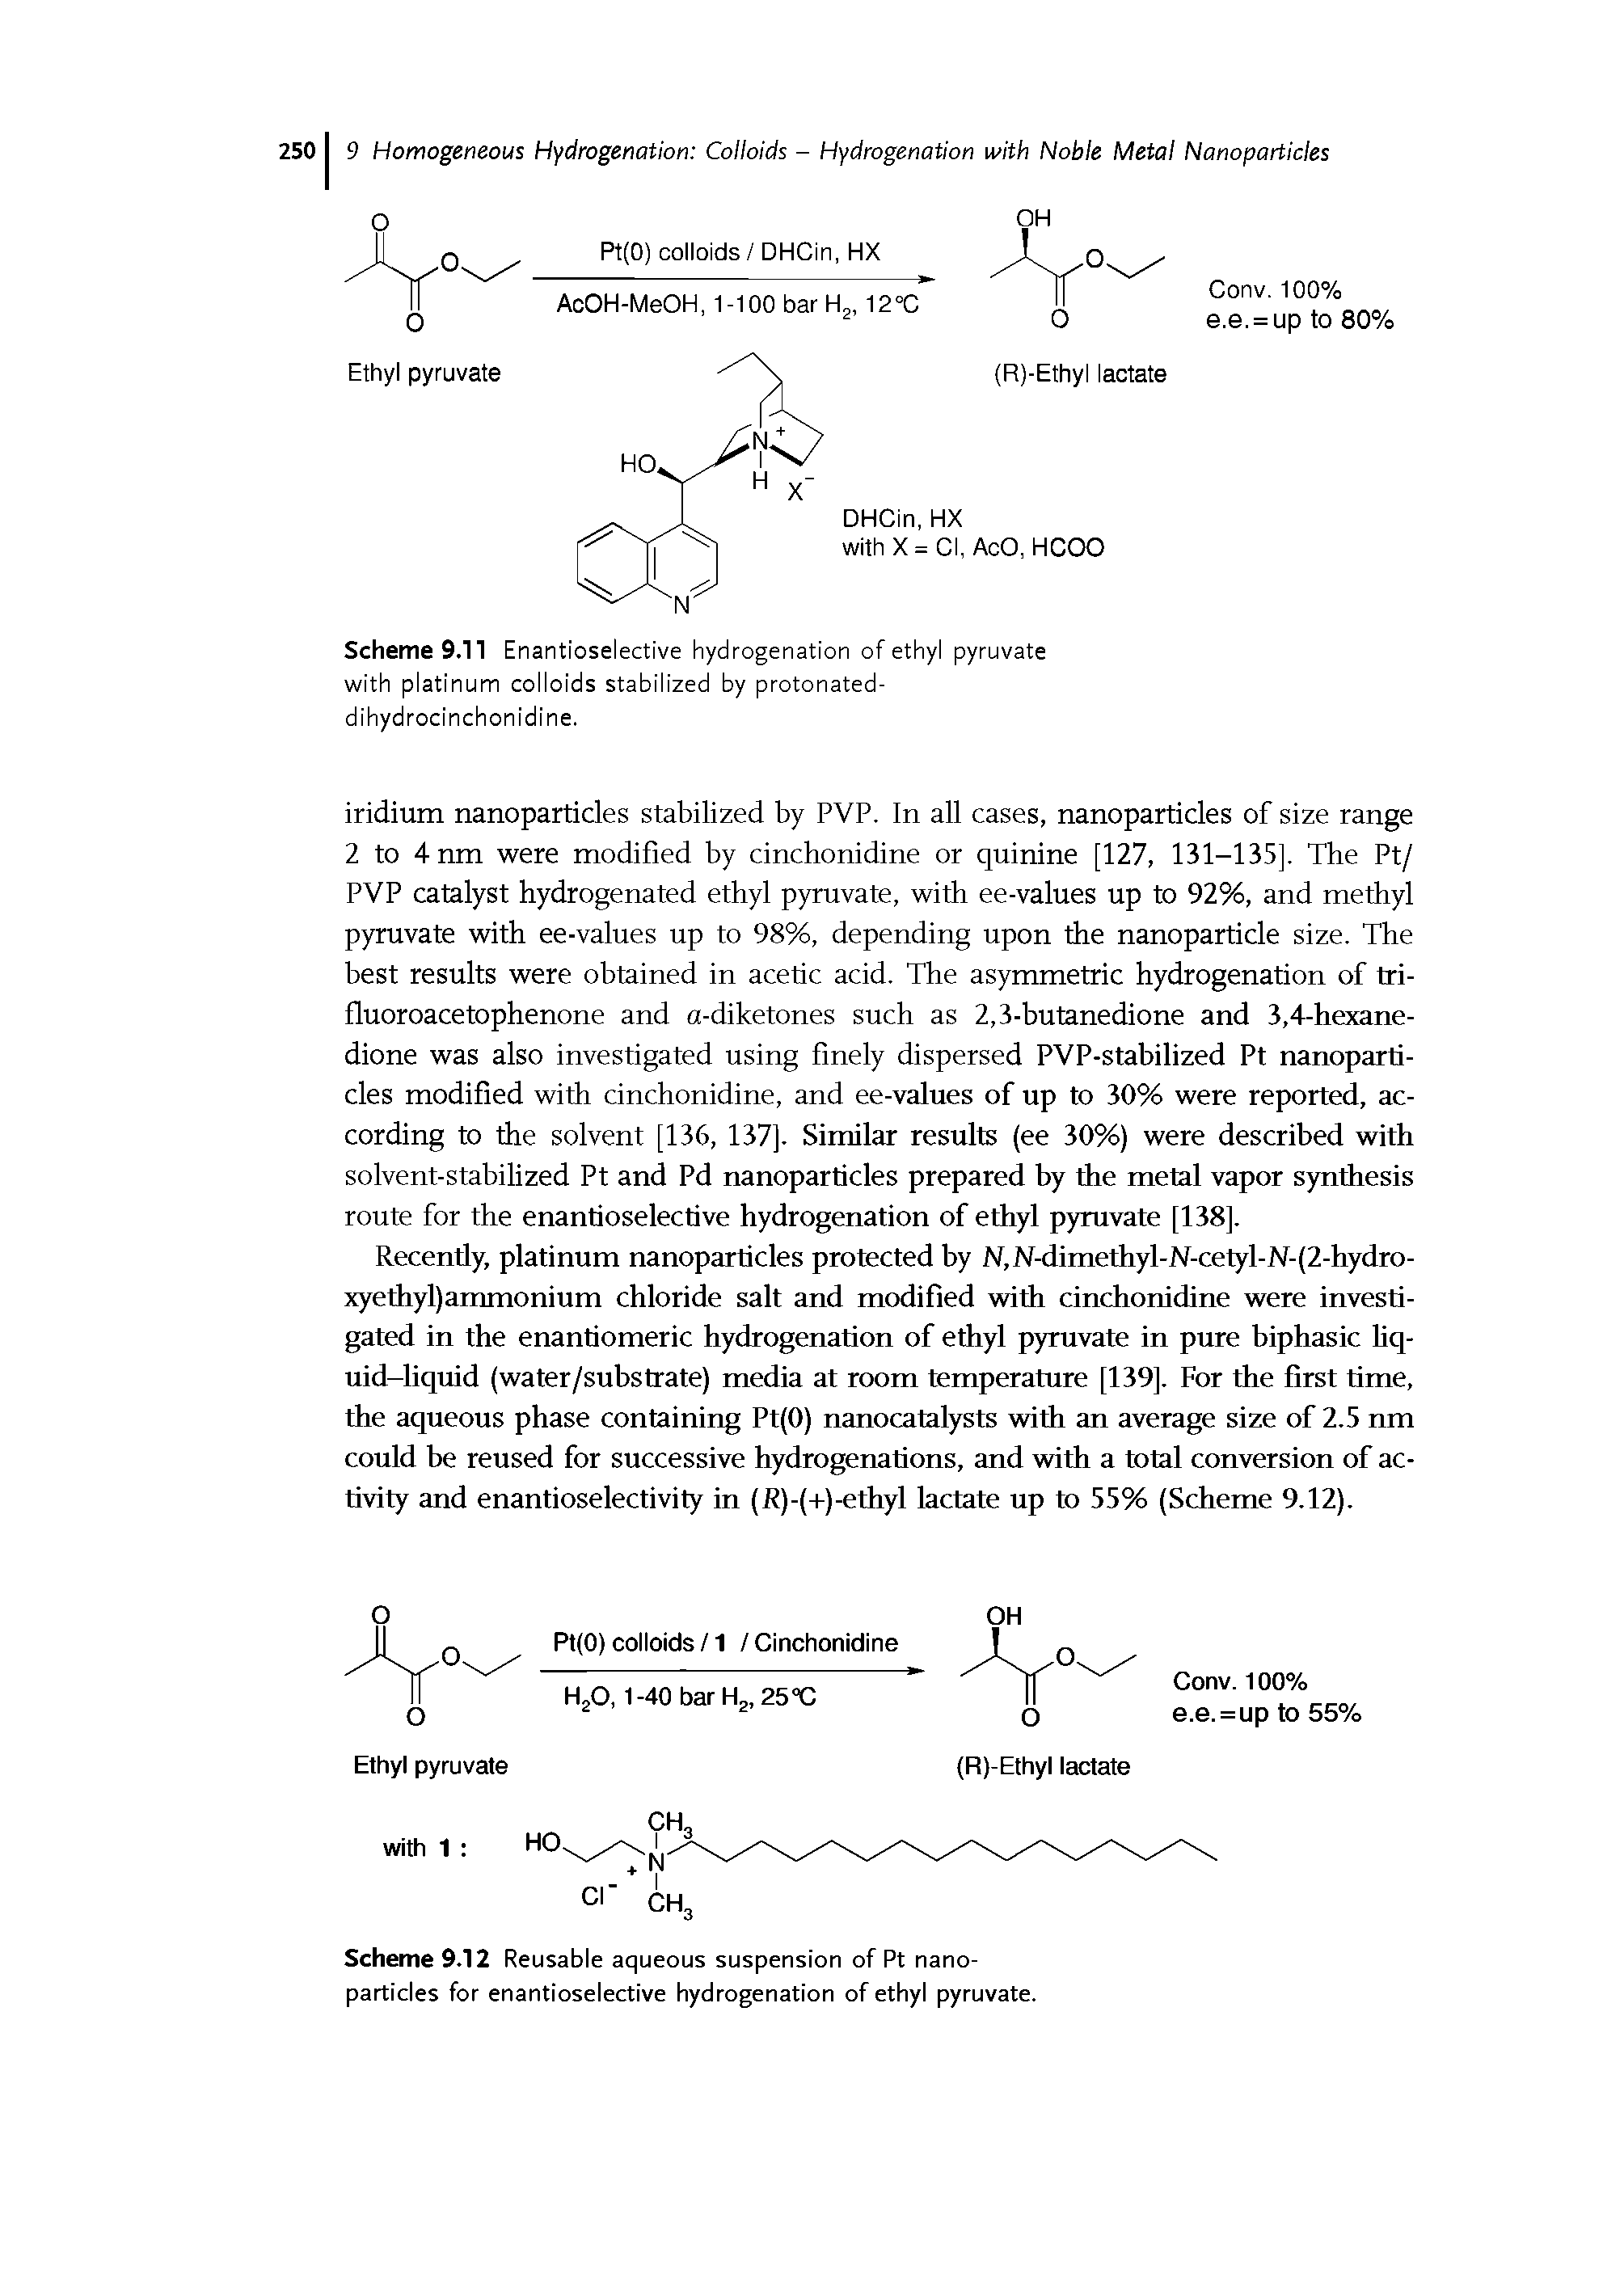 Scheme 9.11 Enantioselective hydrogenation of ethyl pyruvate with platinum colloids stabilized by protonated-dihydrocinchonidine.